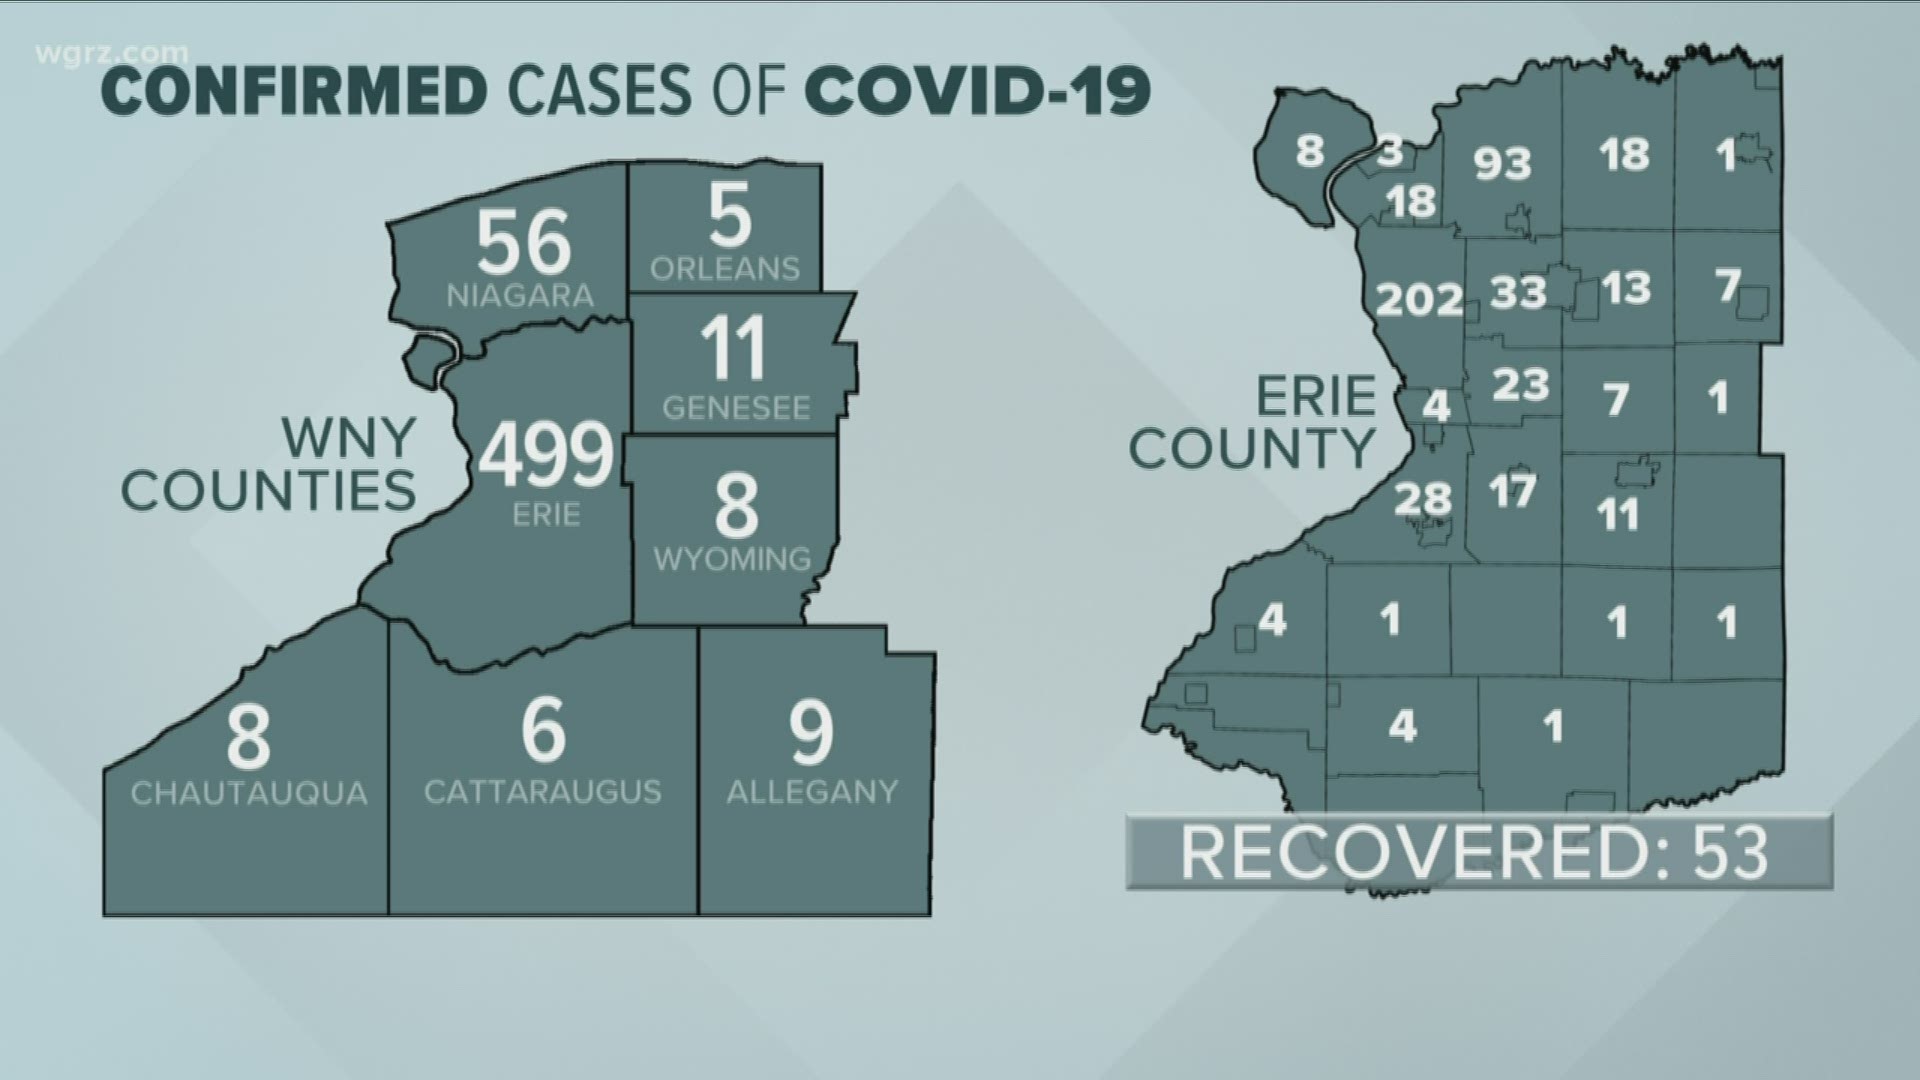 Of the 499 cases in Erie County, 53 of those people have recovered.  A majority of these cases are in the city of Buffalo, with 202 confirmed there.